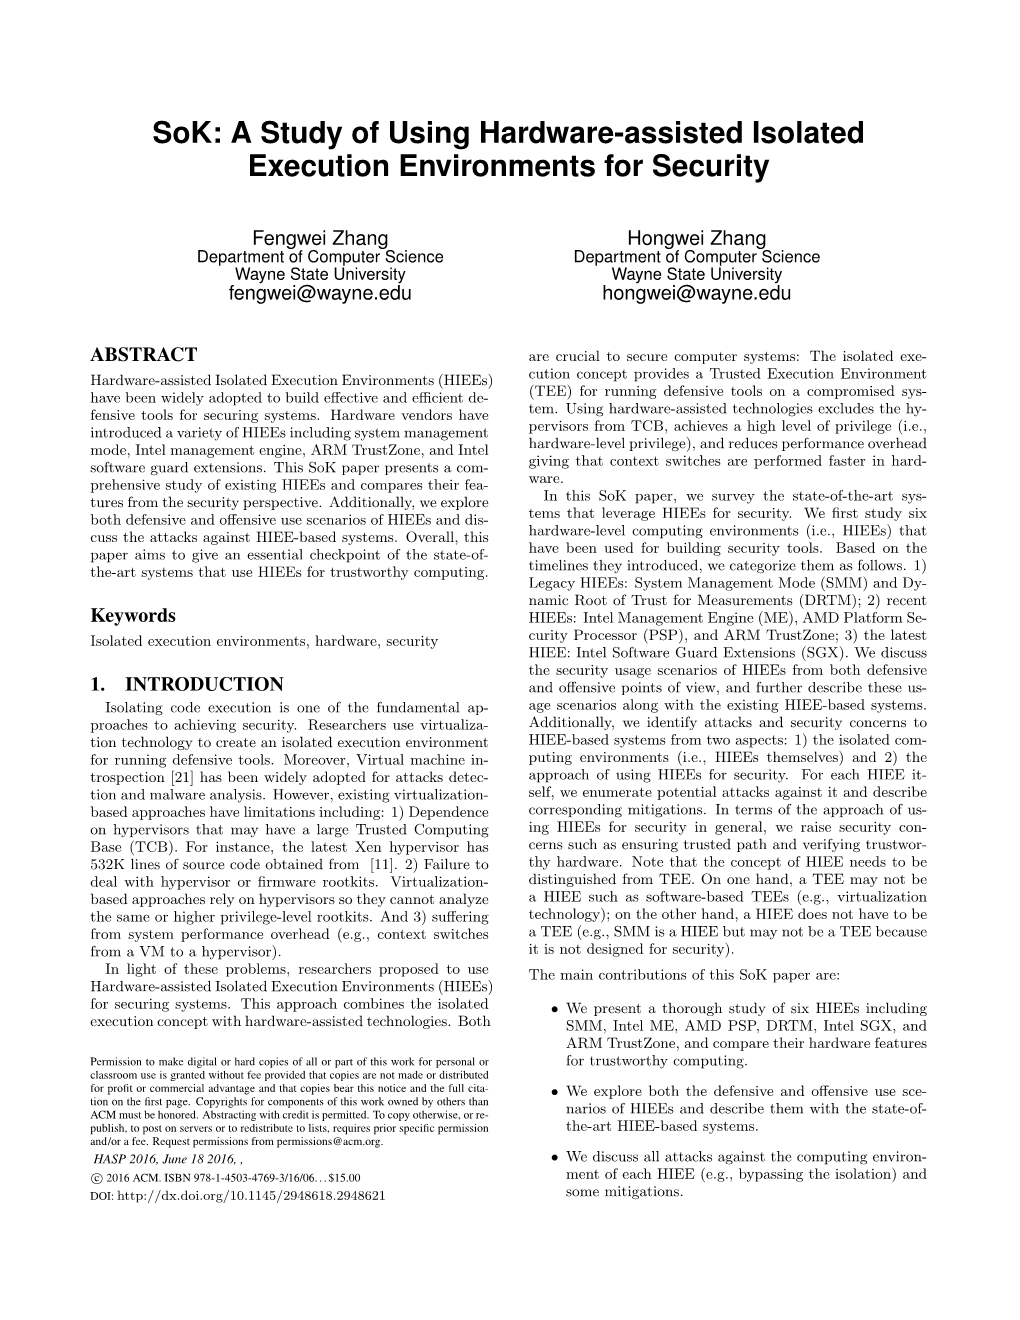 A Study of Using Hardware-Assisted Isolated Execution Environments for Security